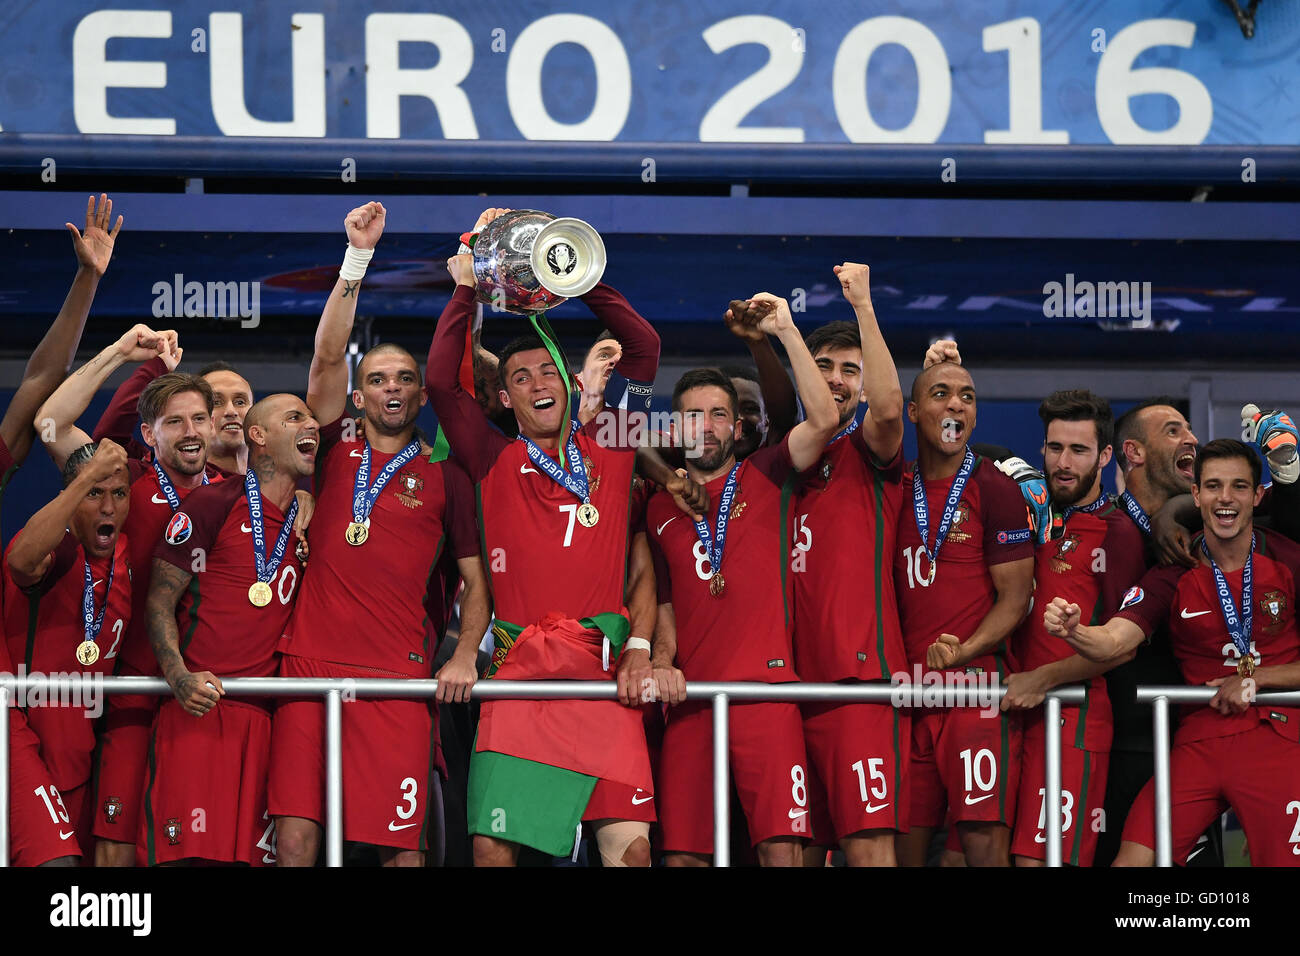 Cristiano Ronaldo (C) of Portugal lifts the trophy after winning the UEFA EURO  2016 soccer Final match between Portugal and France at the Stade de France,  Saint-Denis, France, 10 July 2016. Photo: